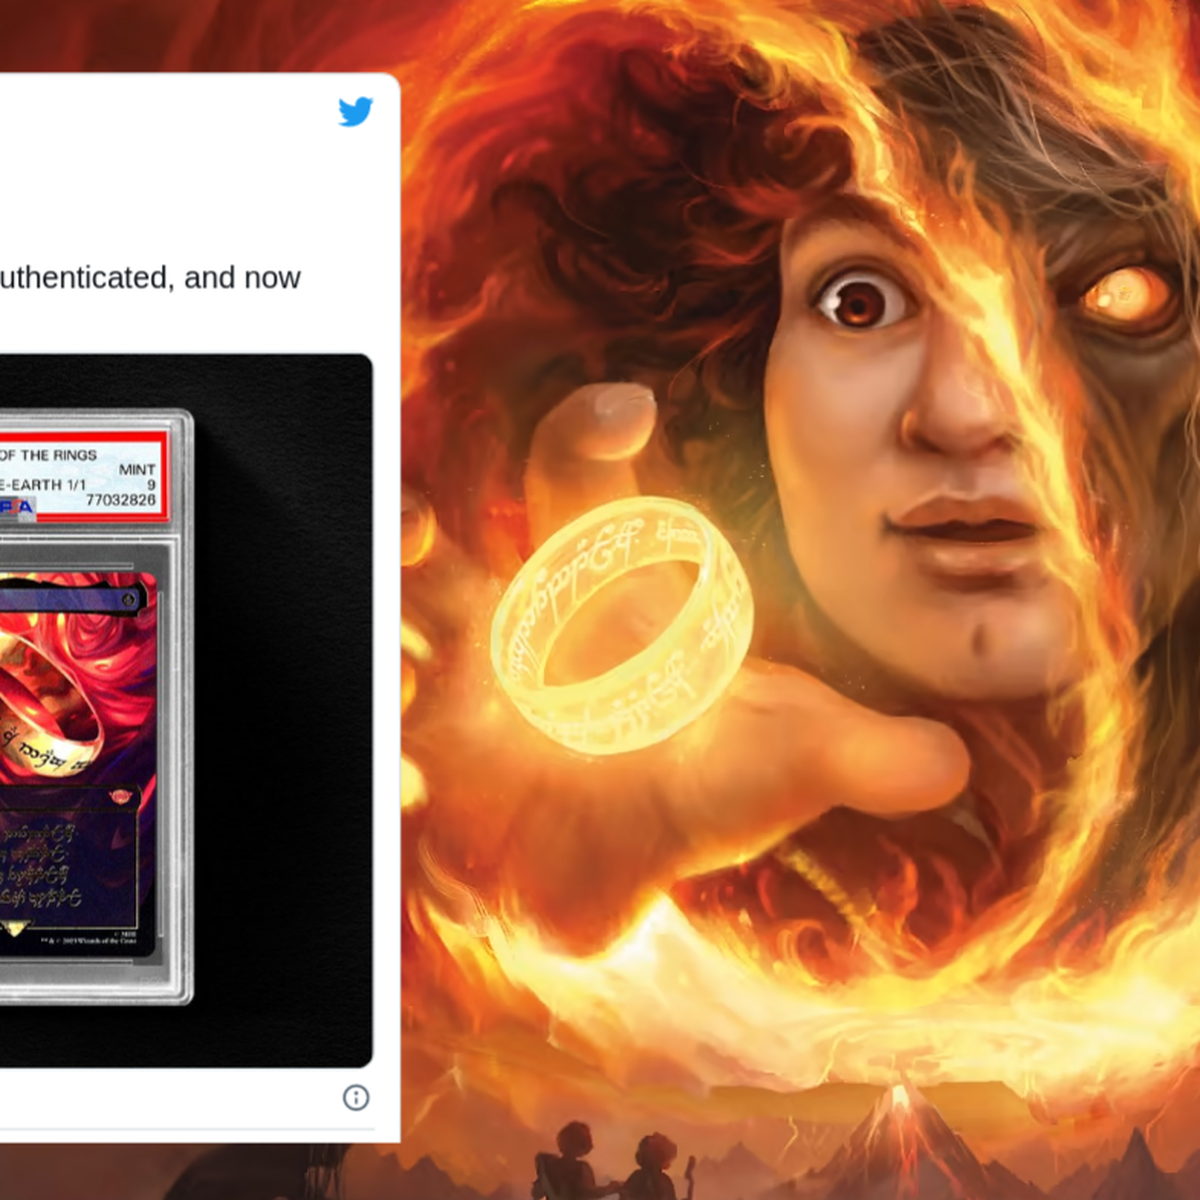 $3 million 'One Ring' Magic the Gathering card found